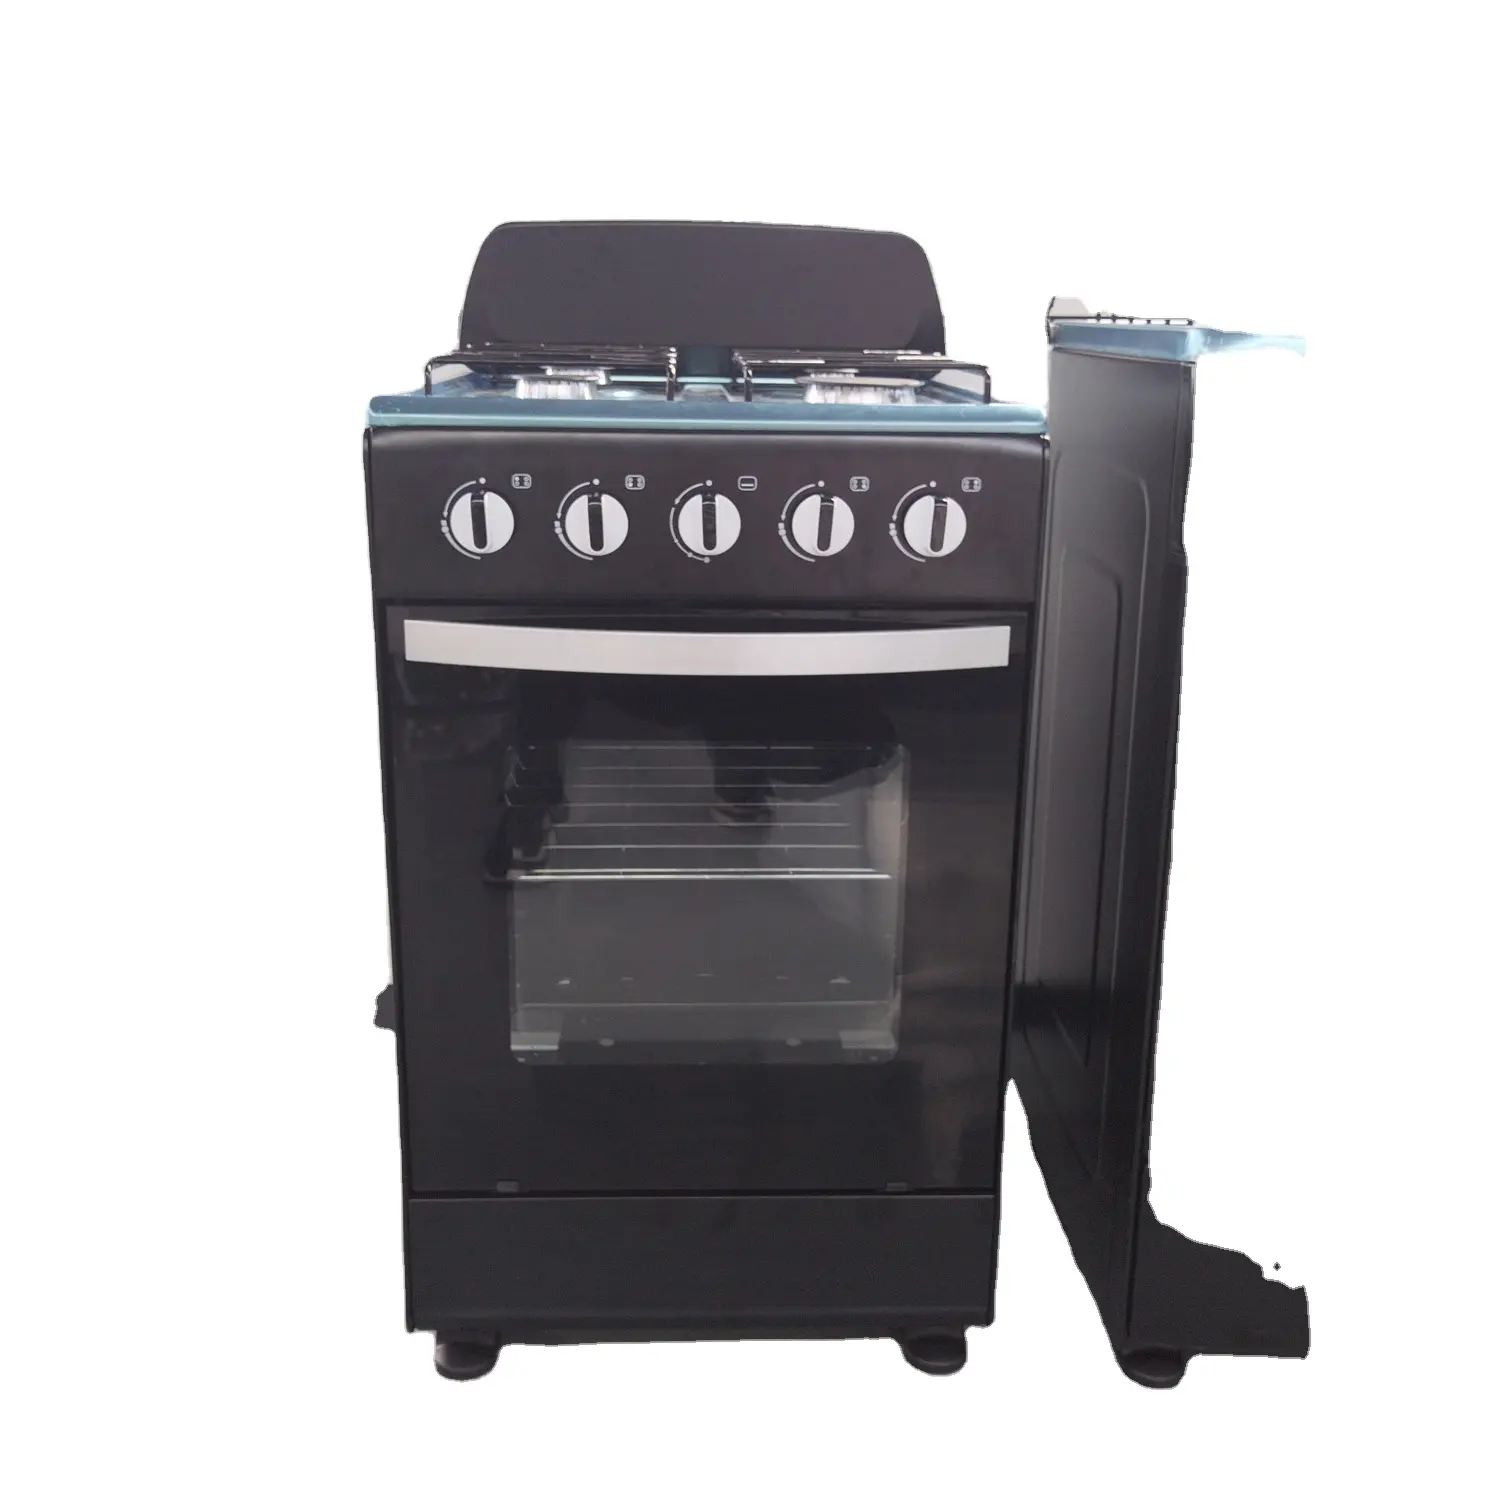 Attractive Gas Range Free Standing Oven with Grill Four Five Burners Gas Stove Gas Oven Hobs